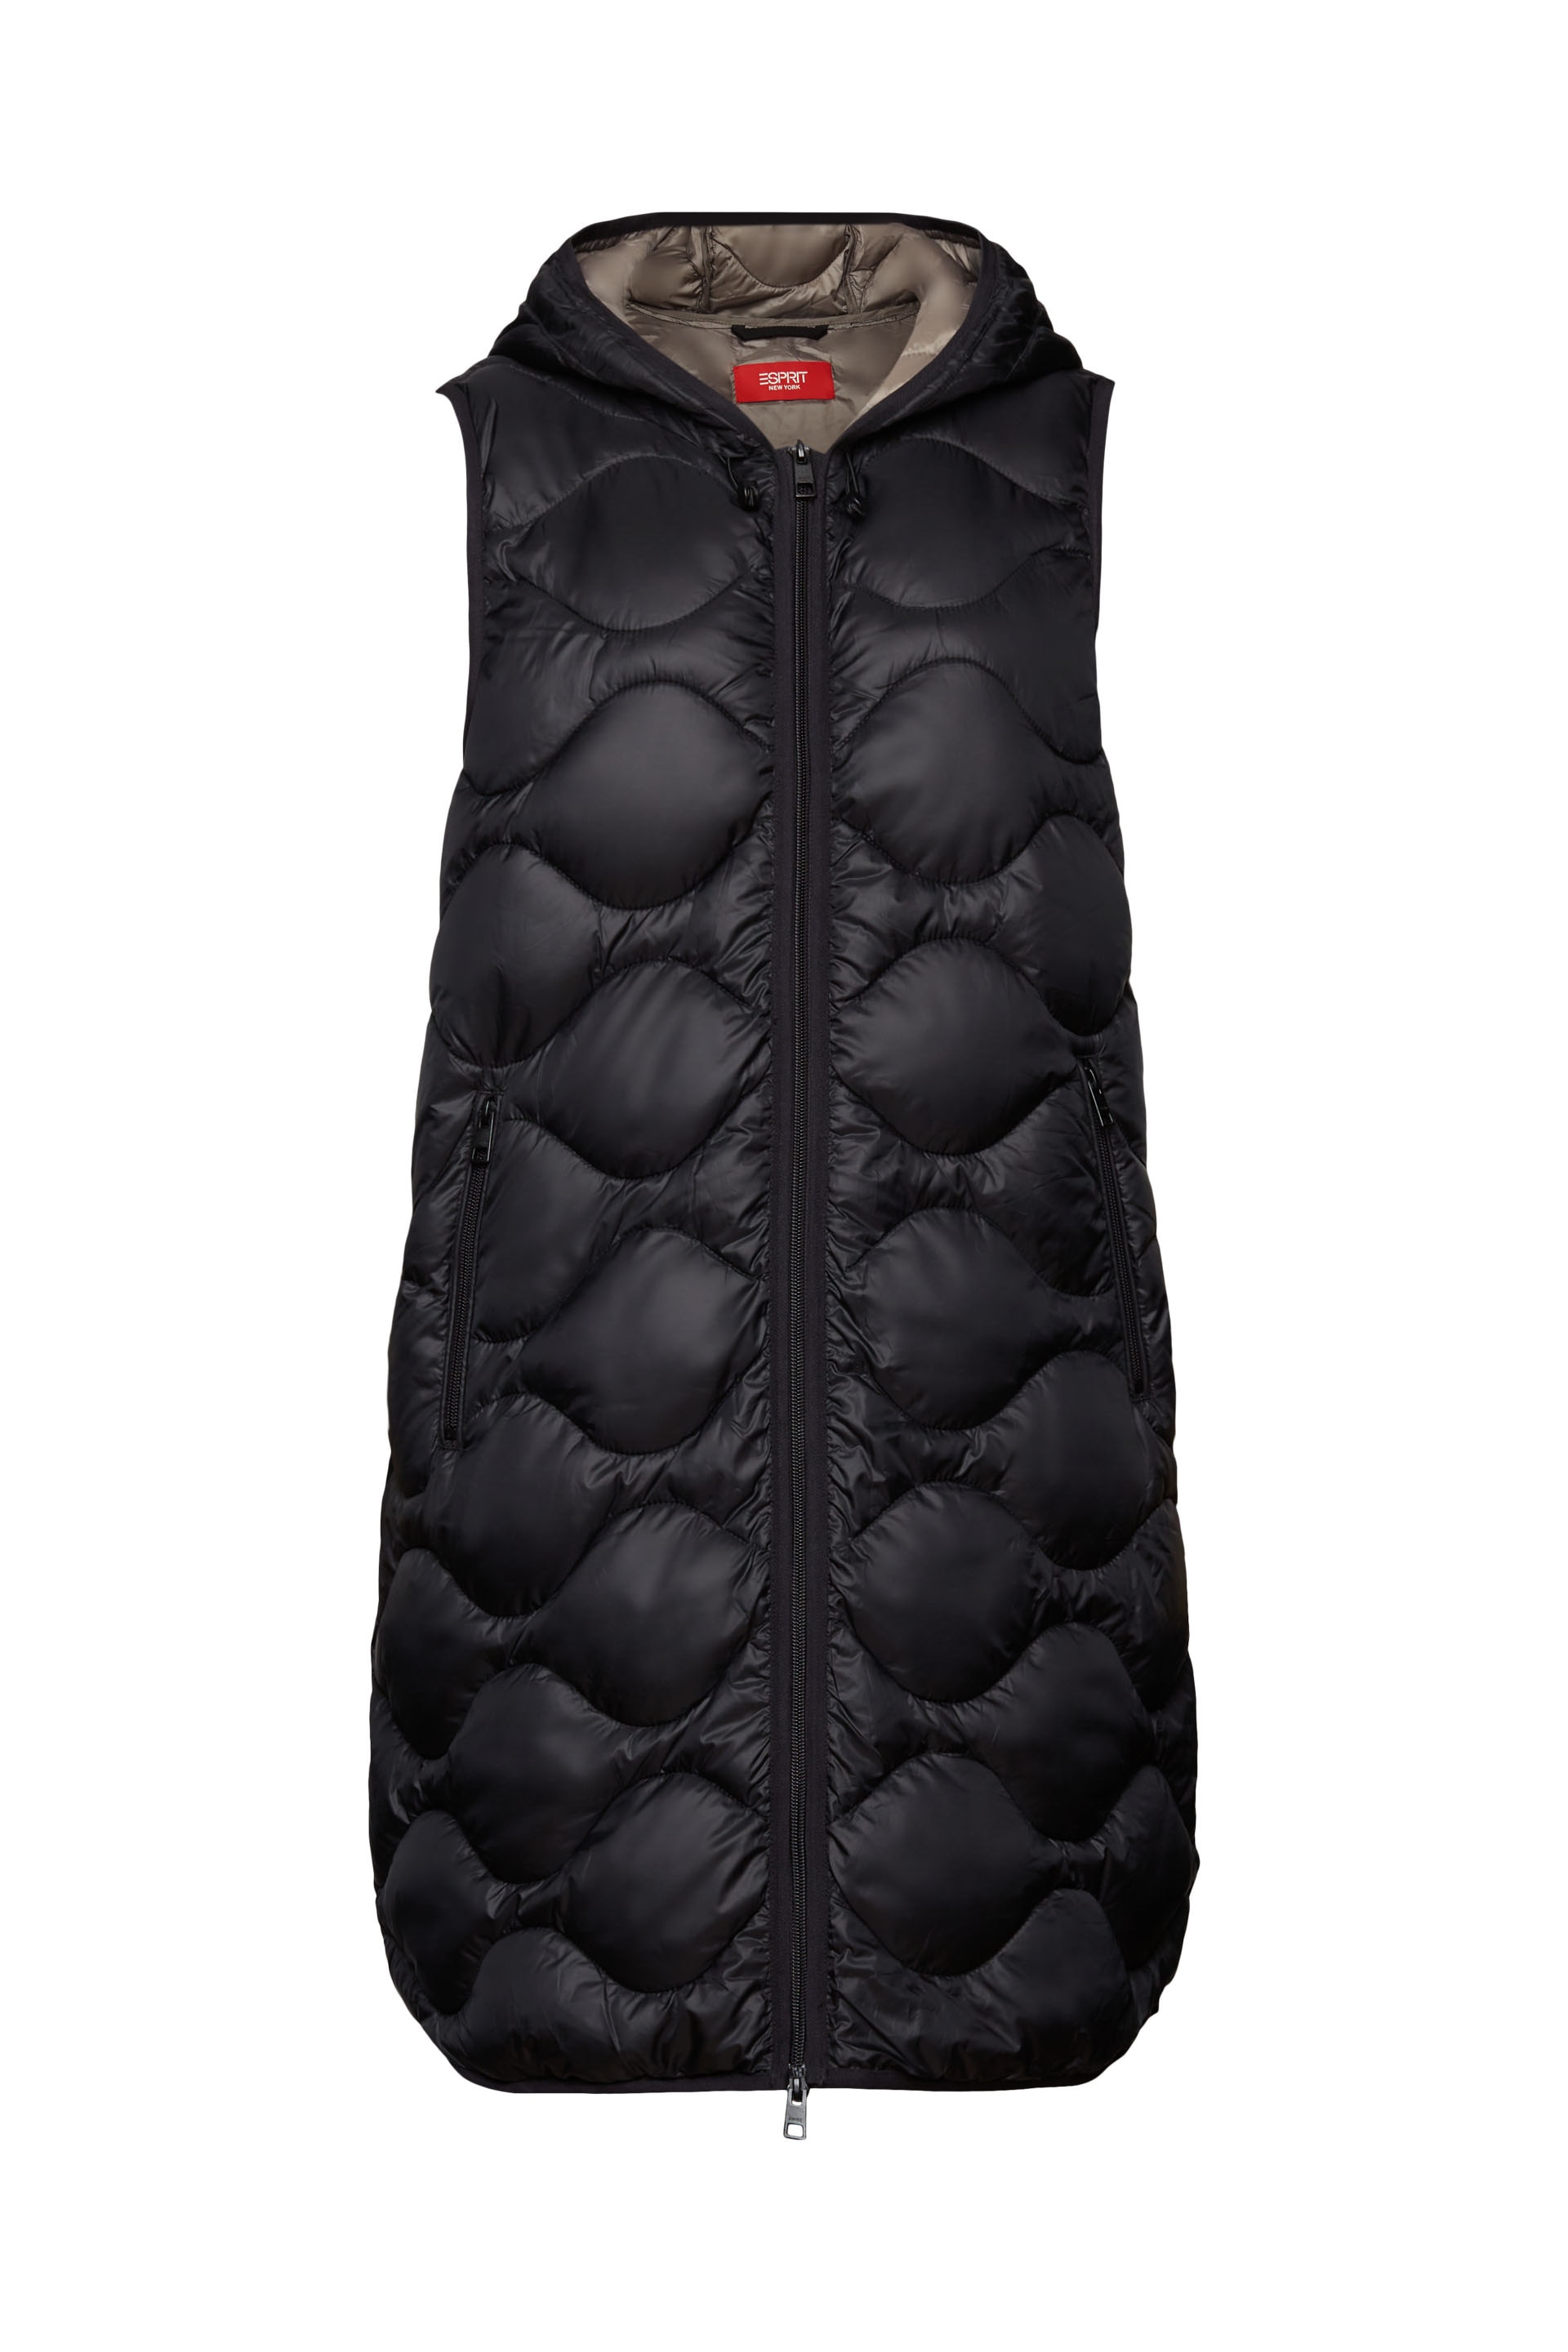 Esprit Long Hooded Quilted Puffer Vest